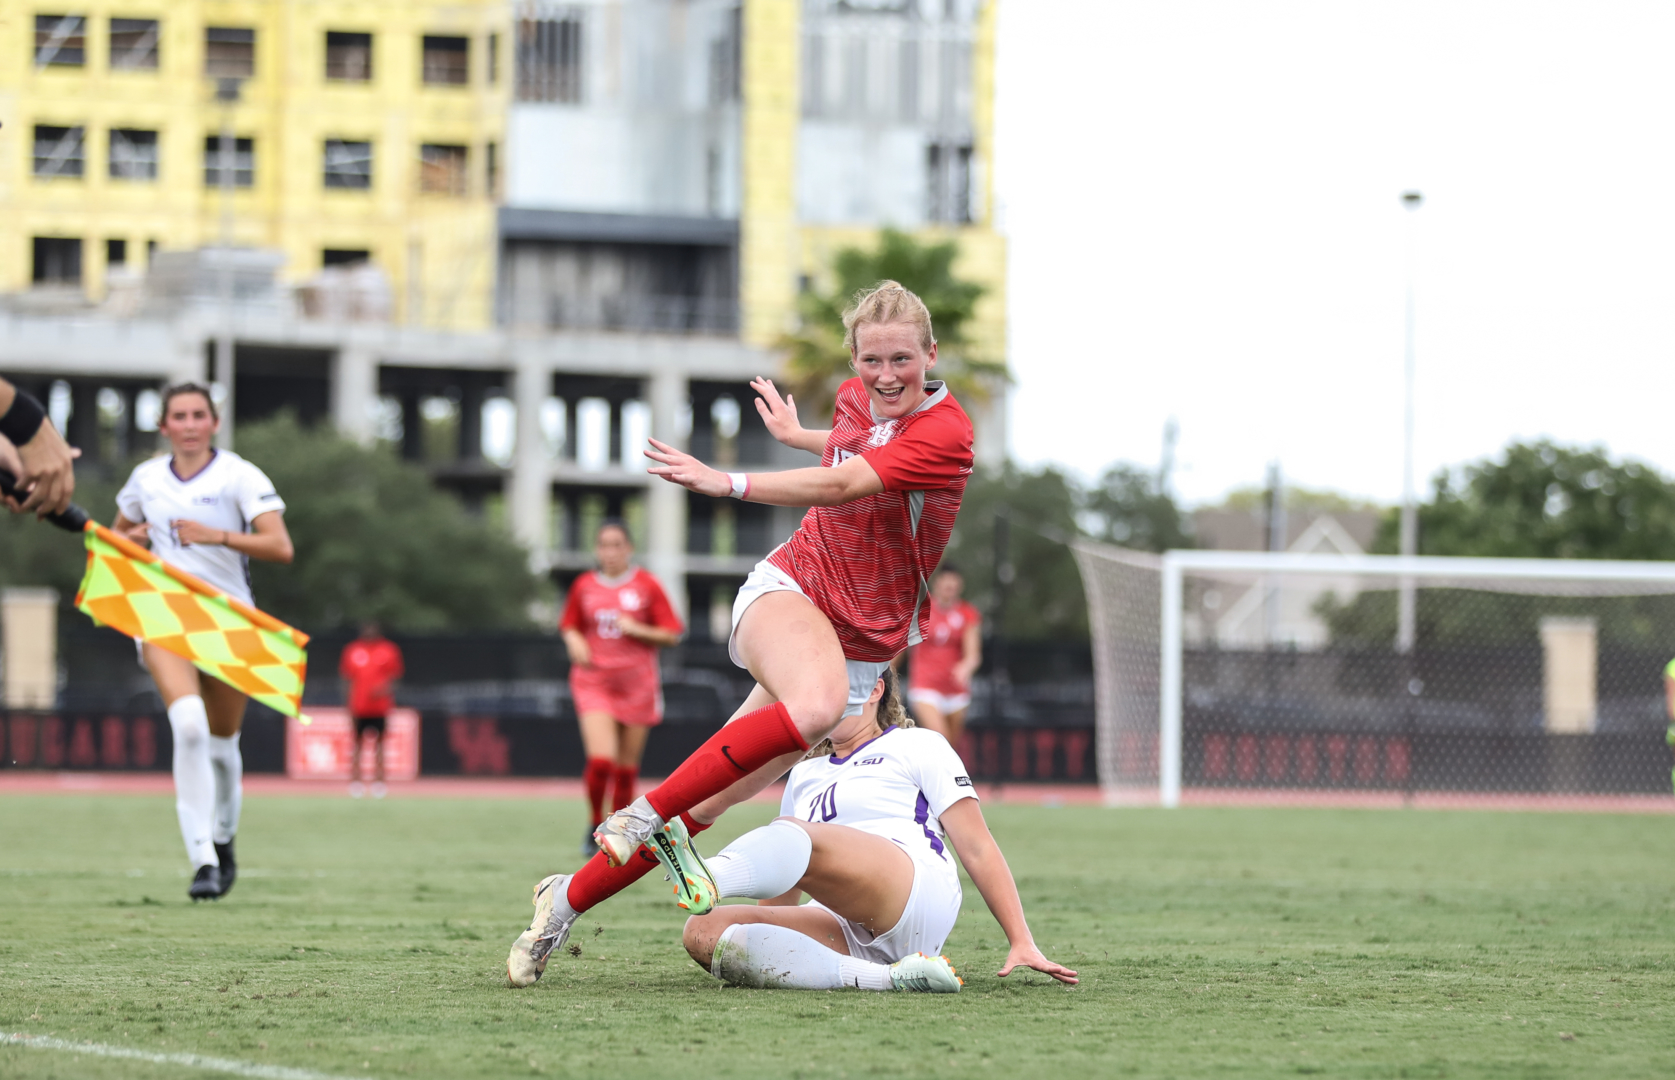 UH soccer dropped its first game of the 2022 season on Sunday night to Lamar. | Sean Thomas/The Cougar